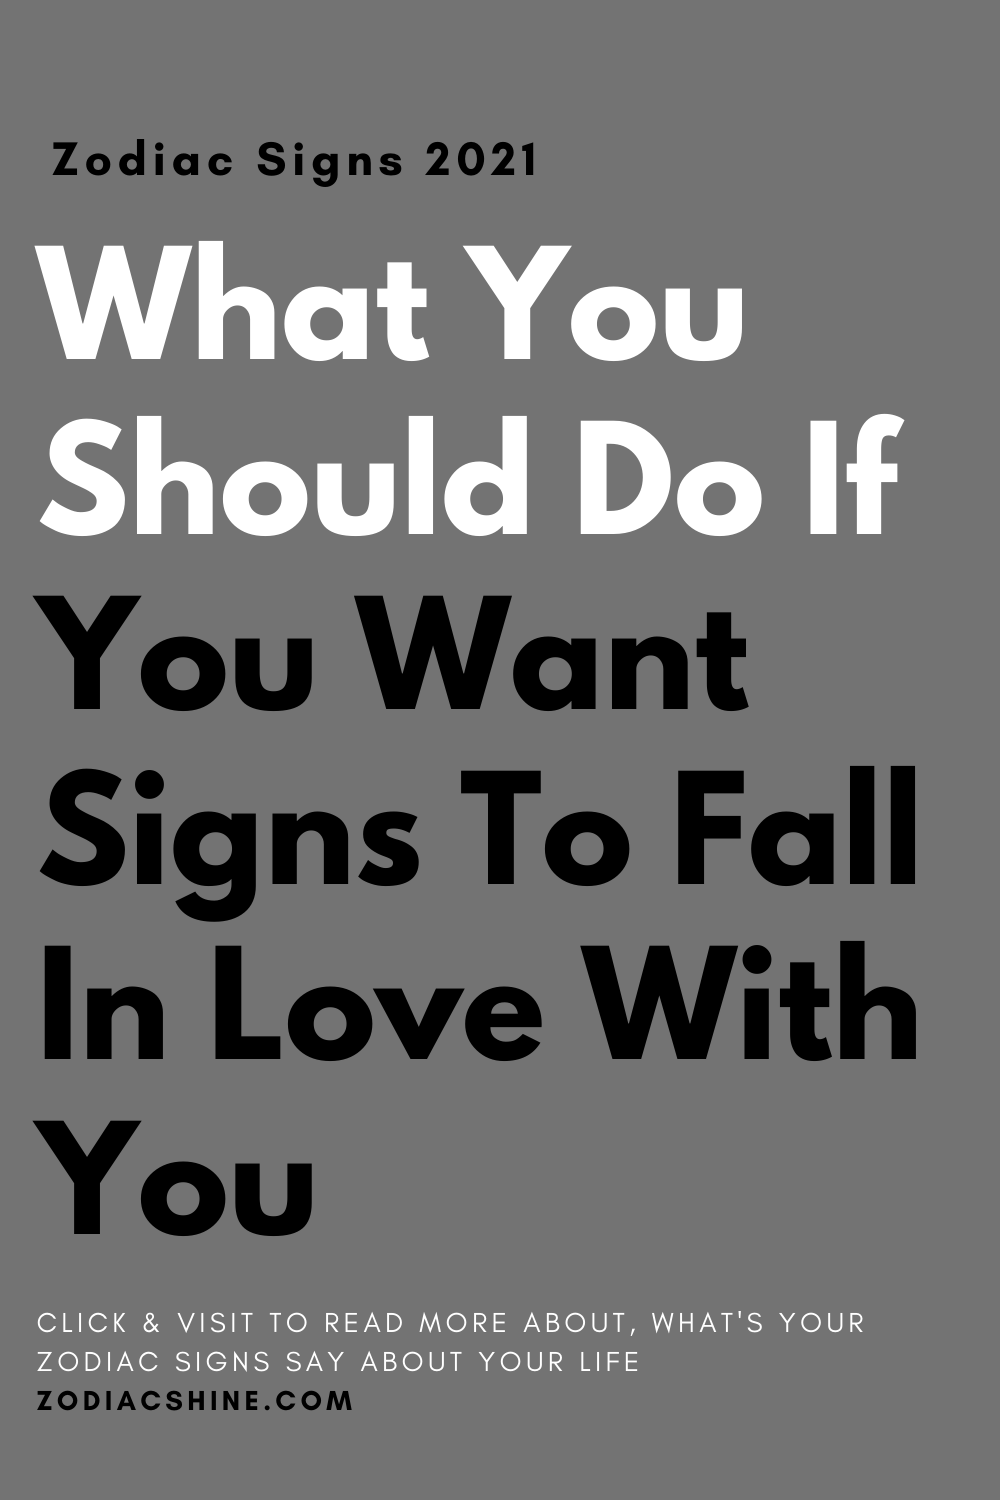 What You Should Do If You Want Signs To Fall In Love With You